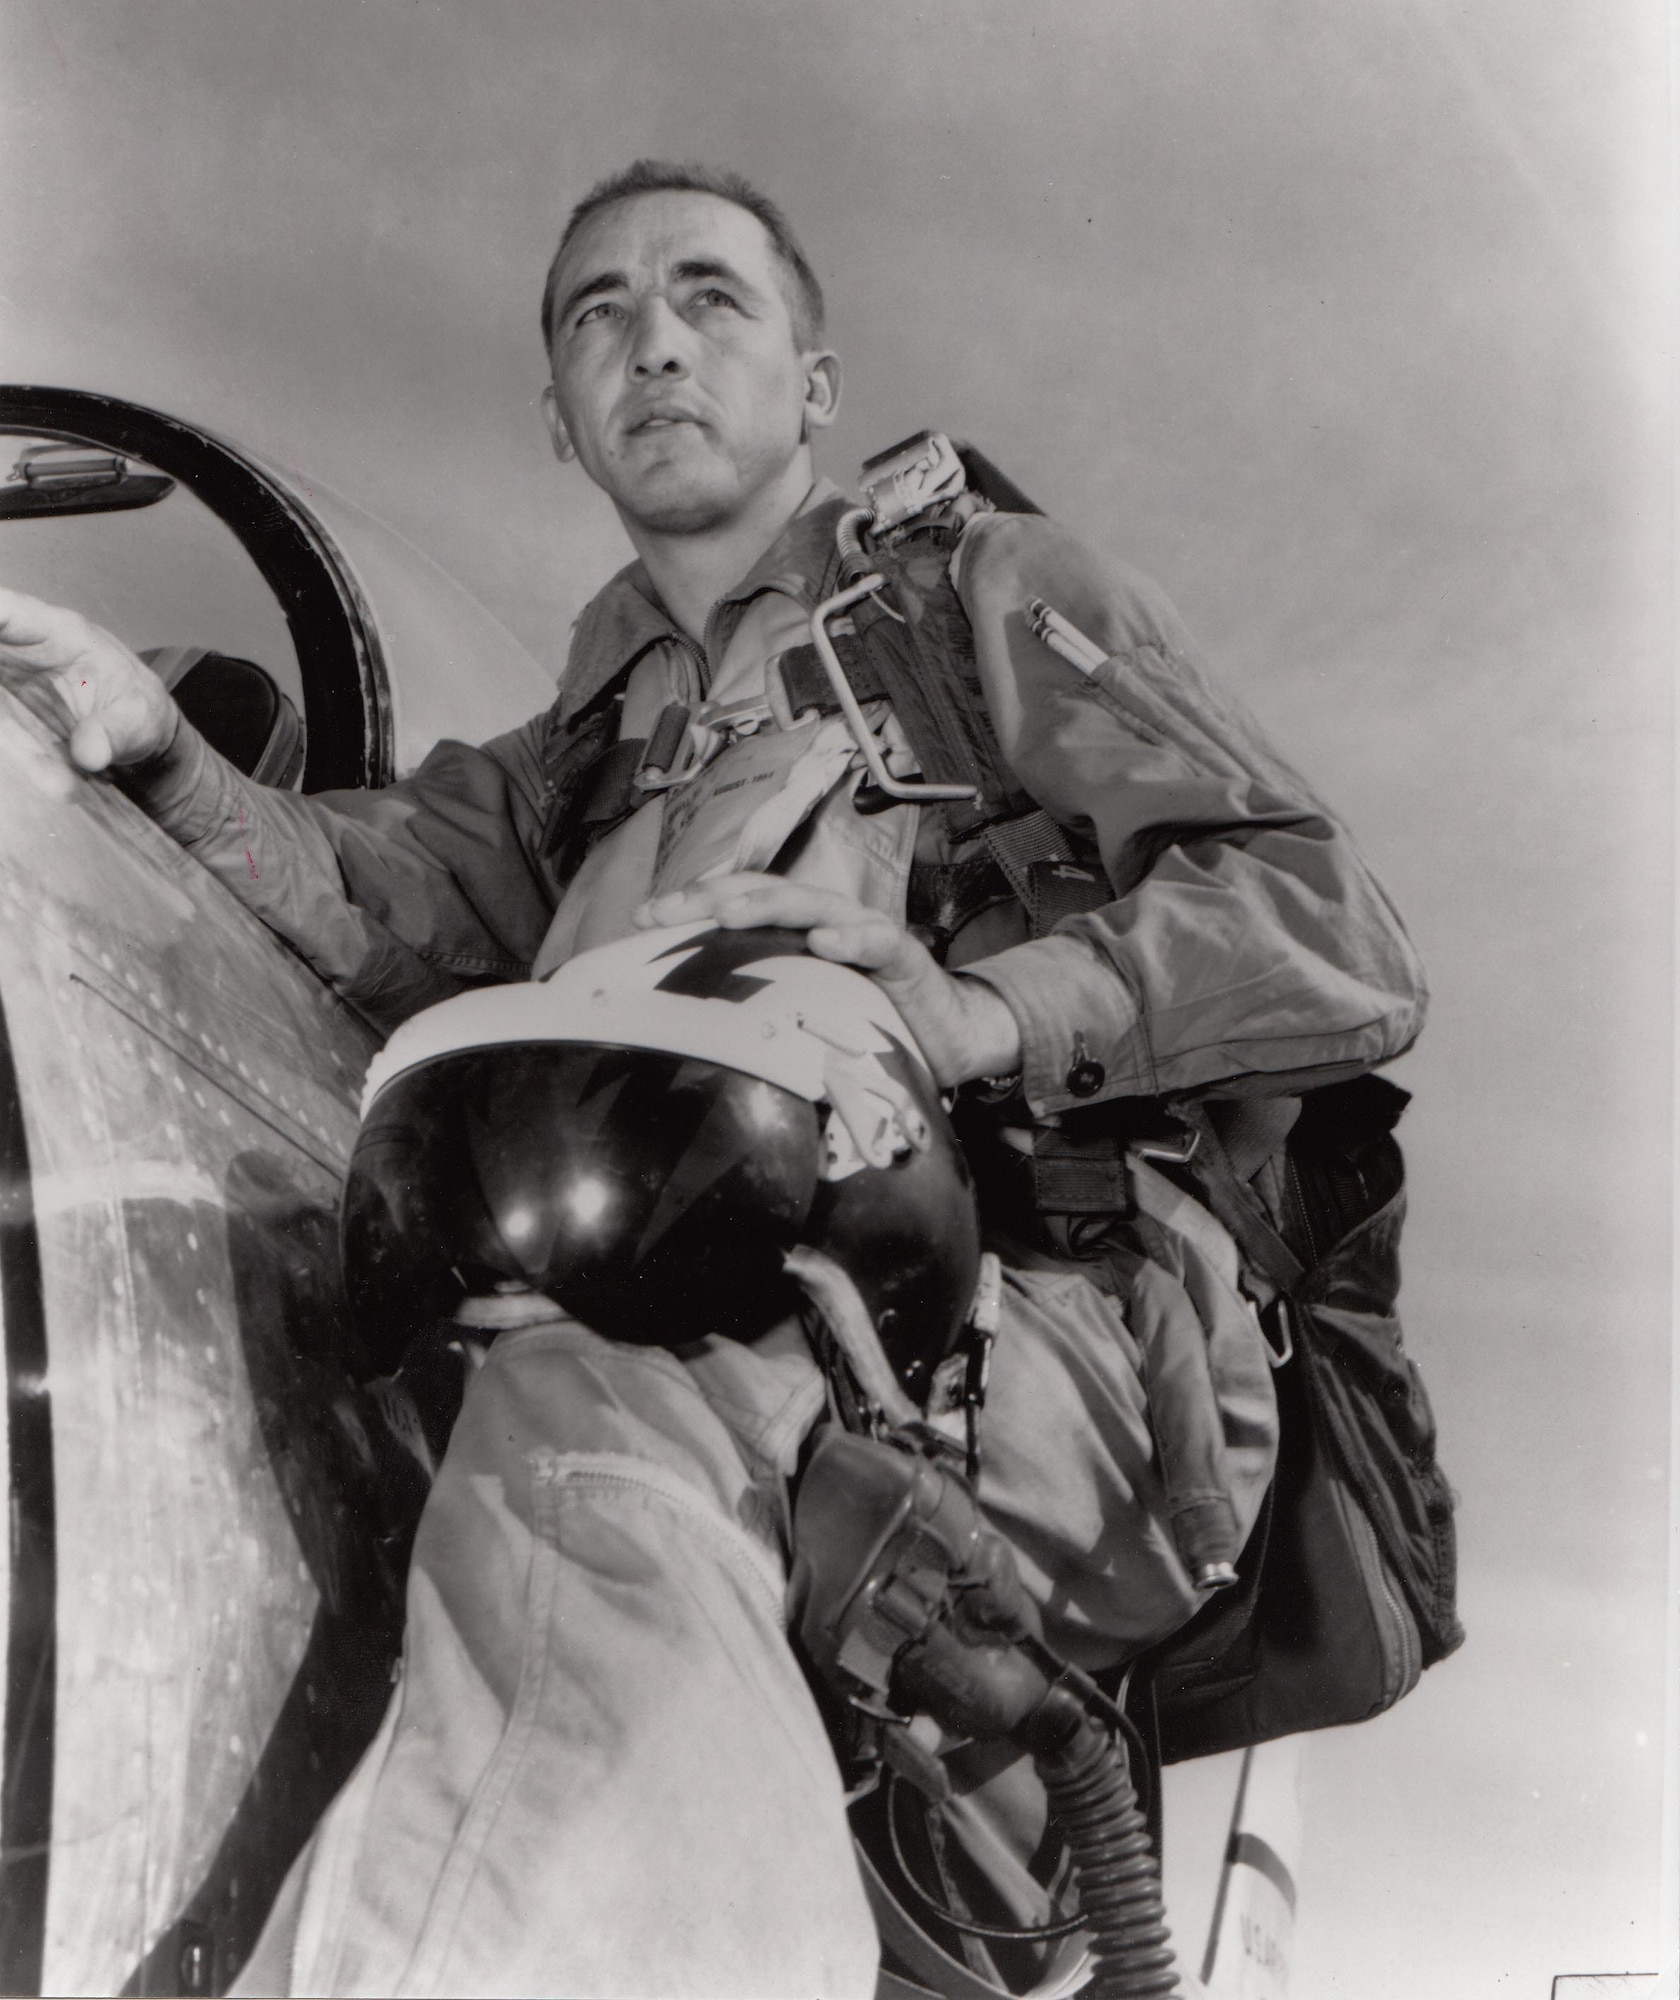 Brig. Gen. Robinson Risner is credited with destroying eight MiG-15s and damaging another while assigned to the 336 Fighter Squadron in Korea.  On Sept. 21, 1952, then-Major Risner scored double kills. He achieved ace status on Sept. 15, 1952, downing his fifth MiG-15. Risner entered the Air Force in 1944 and flew P-38, P-39, and P-40 fighers with the 30th Fighter Squadron in Panama from 1944 to 1946.